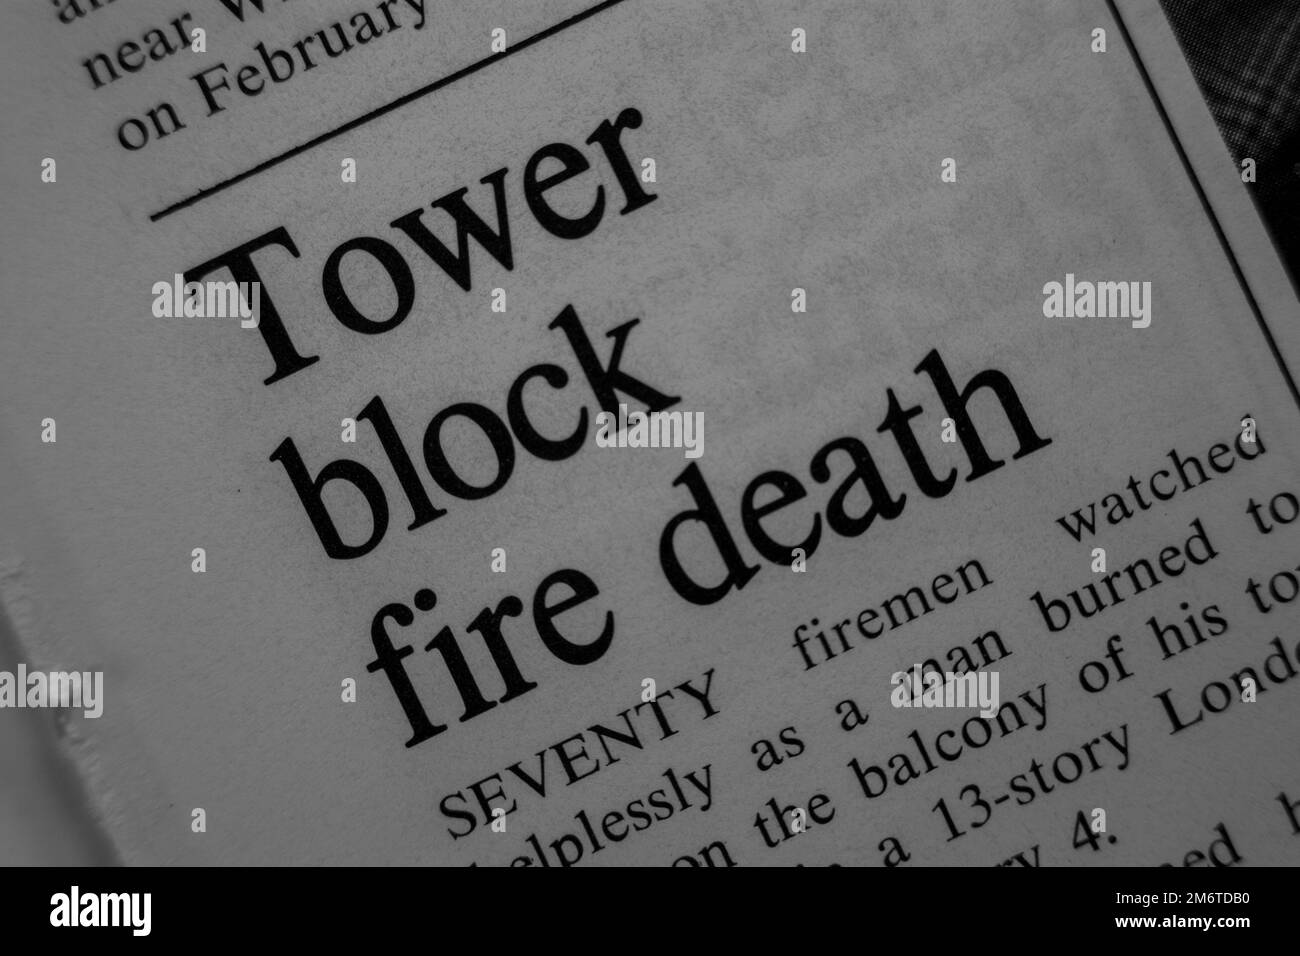 Tower block fire death - news story from 1975 newspaper headline article title in black and white Stock Photo